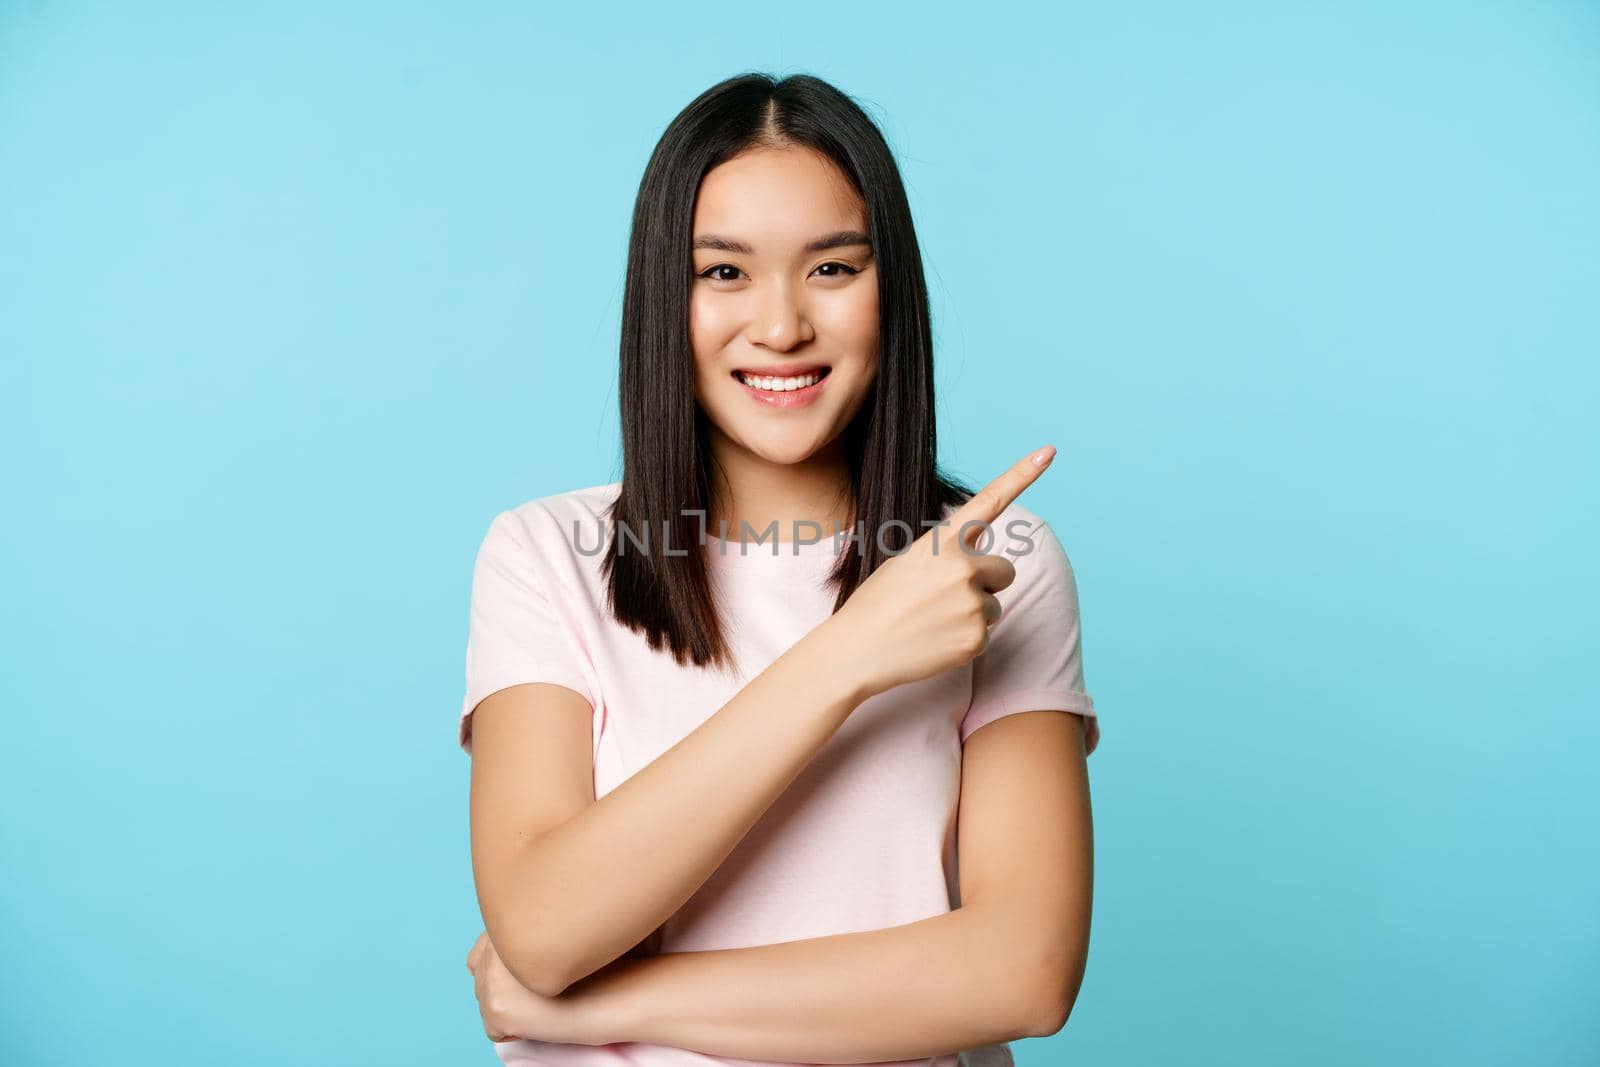 Smiling young asian woman 20 years old, pointing finger at upper right corner, showing promo banner, blue background.